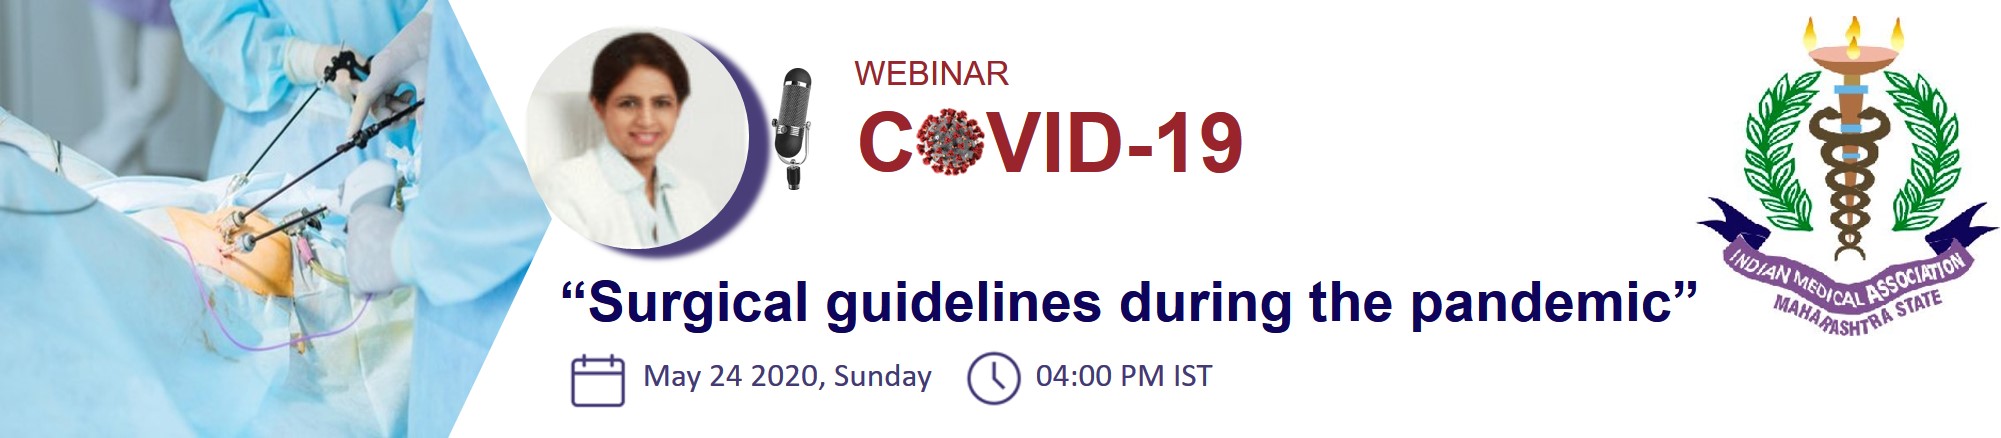 Guidelines for surgical treatment during and post COVID-19 pandemic